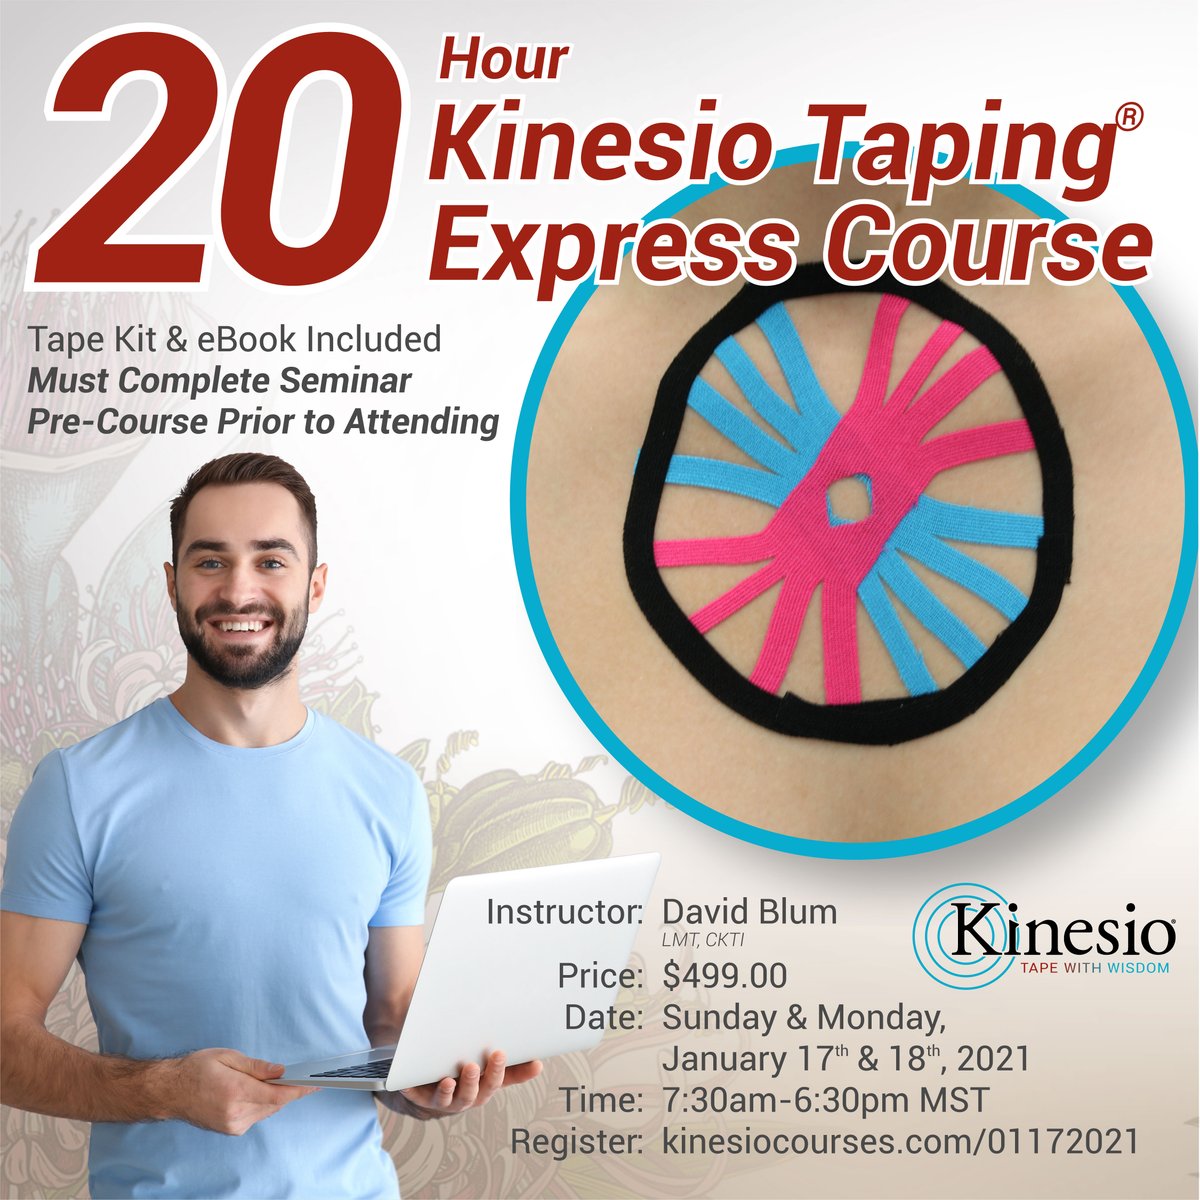 Space is limited!!! Hurry up and get yourself a seat before 12/31/2020. We will be closing registrations soon, below is the link to register.
Register: kinesiocourses.com/01172021
#kinesiotape #painrelieft #CEUs #online #original #education
#tapewithwisdom